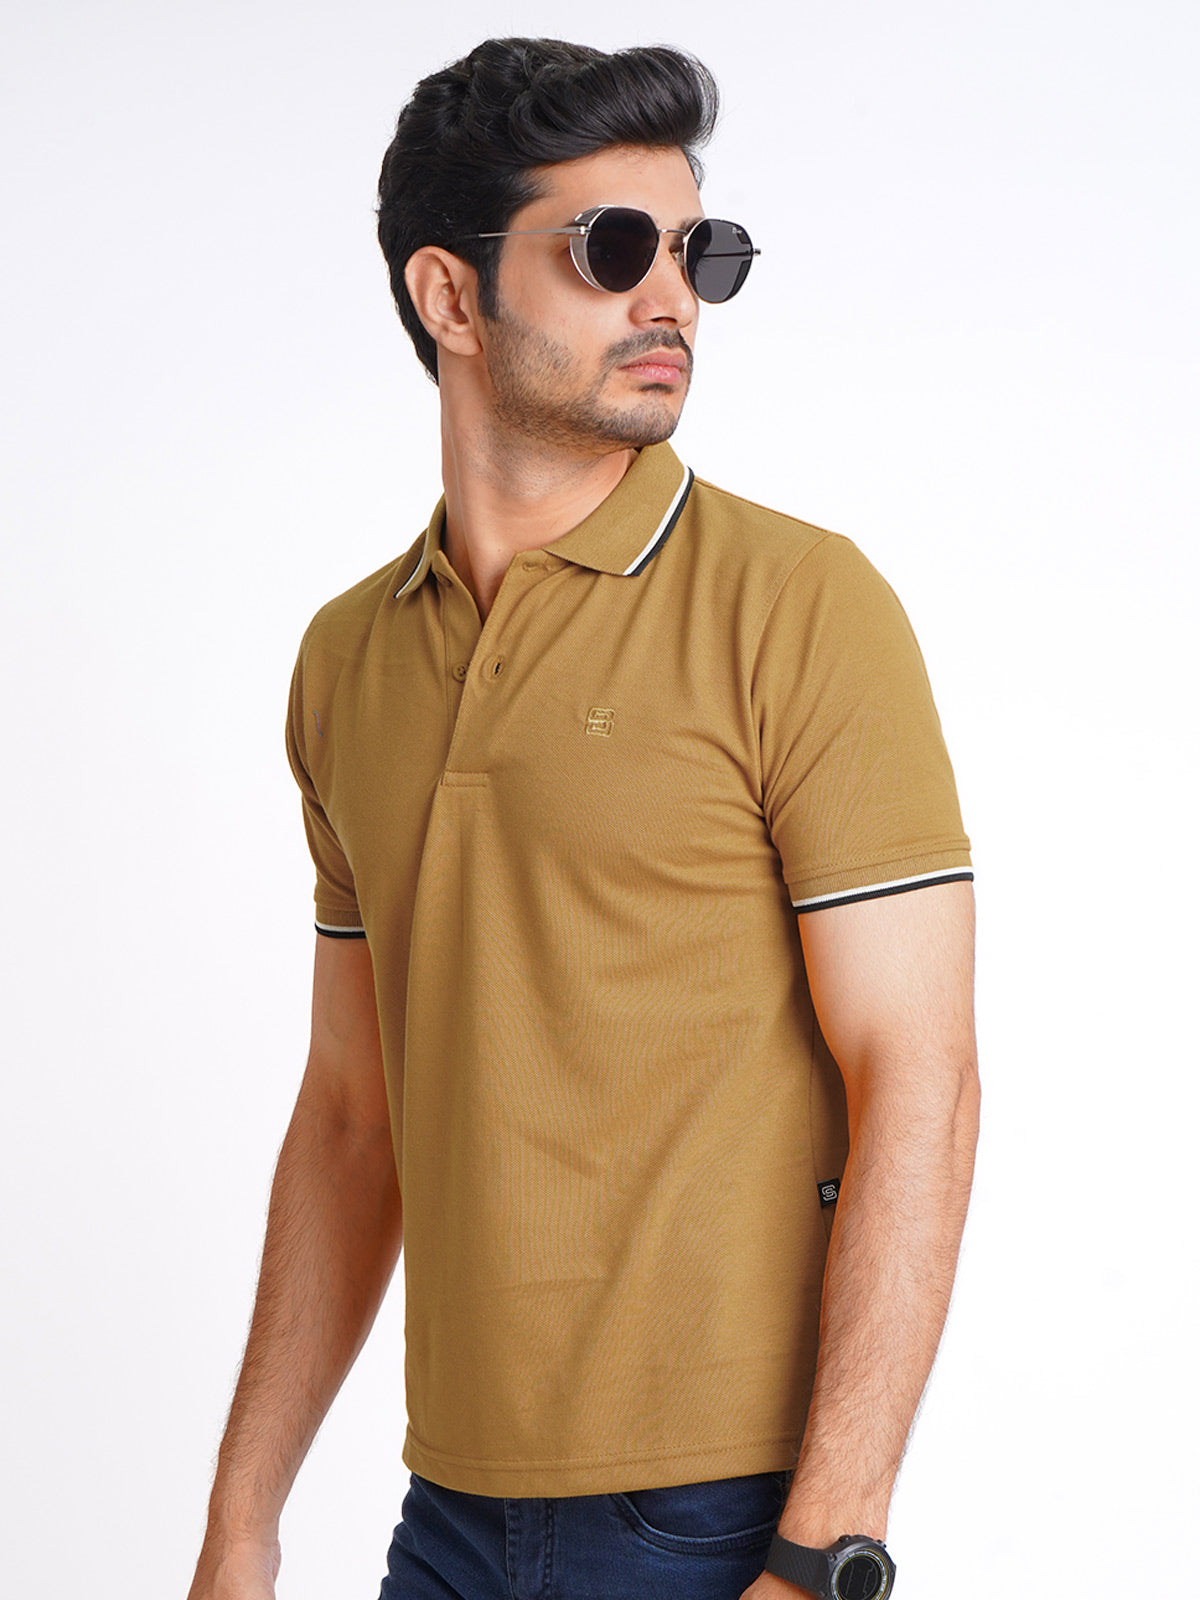 Mustard Plain Contrast Tipping Half Sleeves Polo T-Shirt (POLO-593)